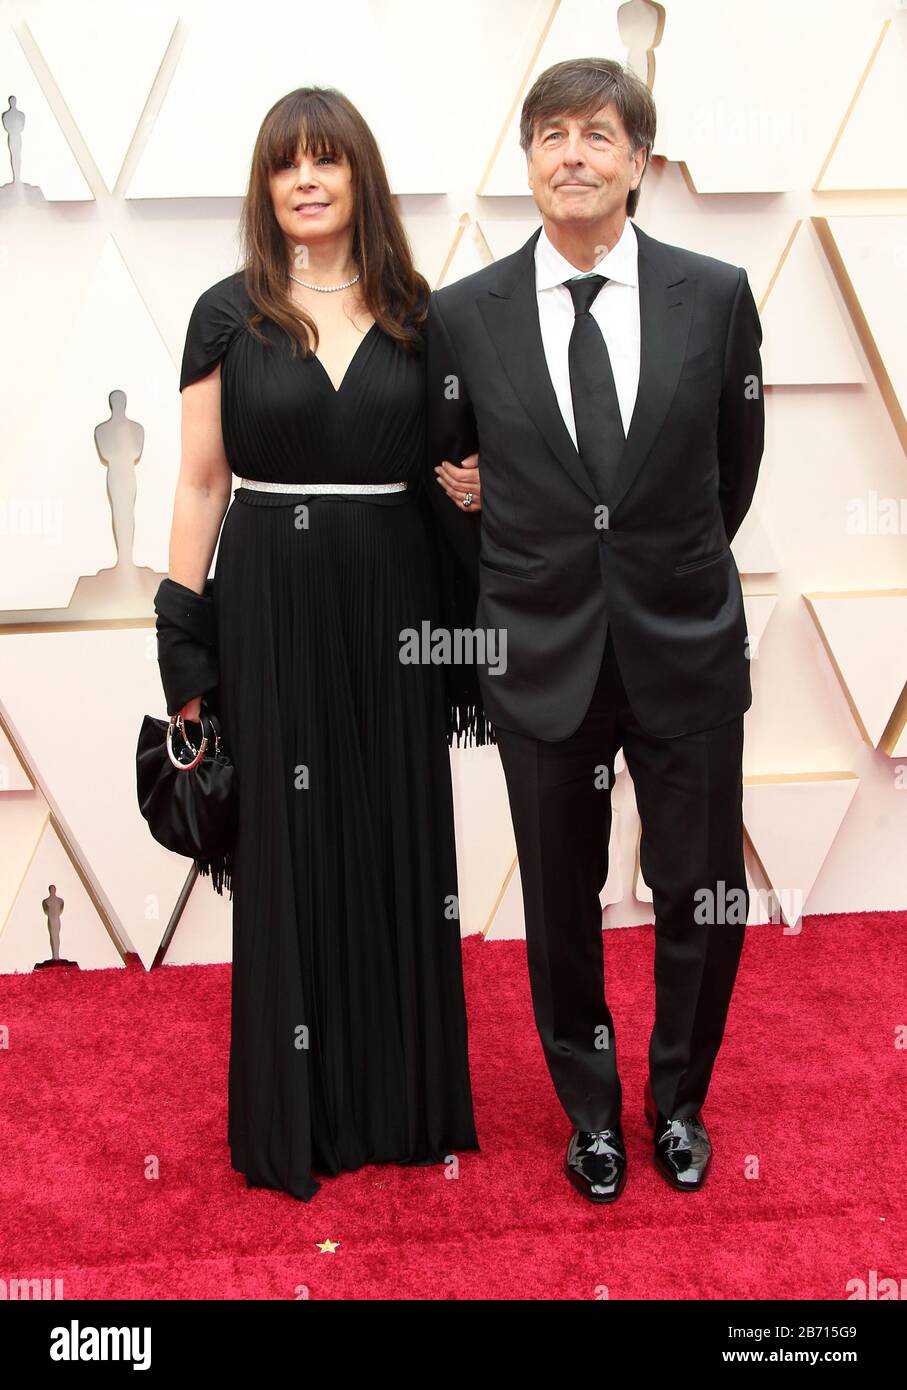 92nd Academy Awards (Oscars 2020) - Arrivals held at the Dolby Theatre in Los Angeles, California. Featuring: Ann Marie Zirbes, Thomas Newman Where: Los Angeles, California, United States When: 09 Feb 2020 Credit: Adriana M. Barraza/WENN Stock Photo